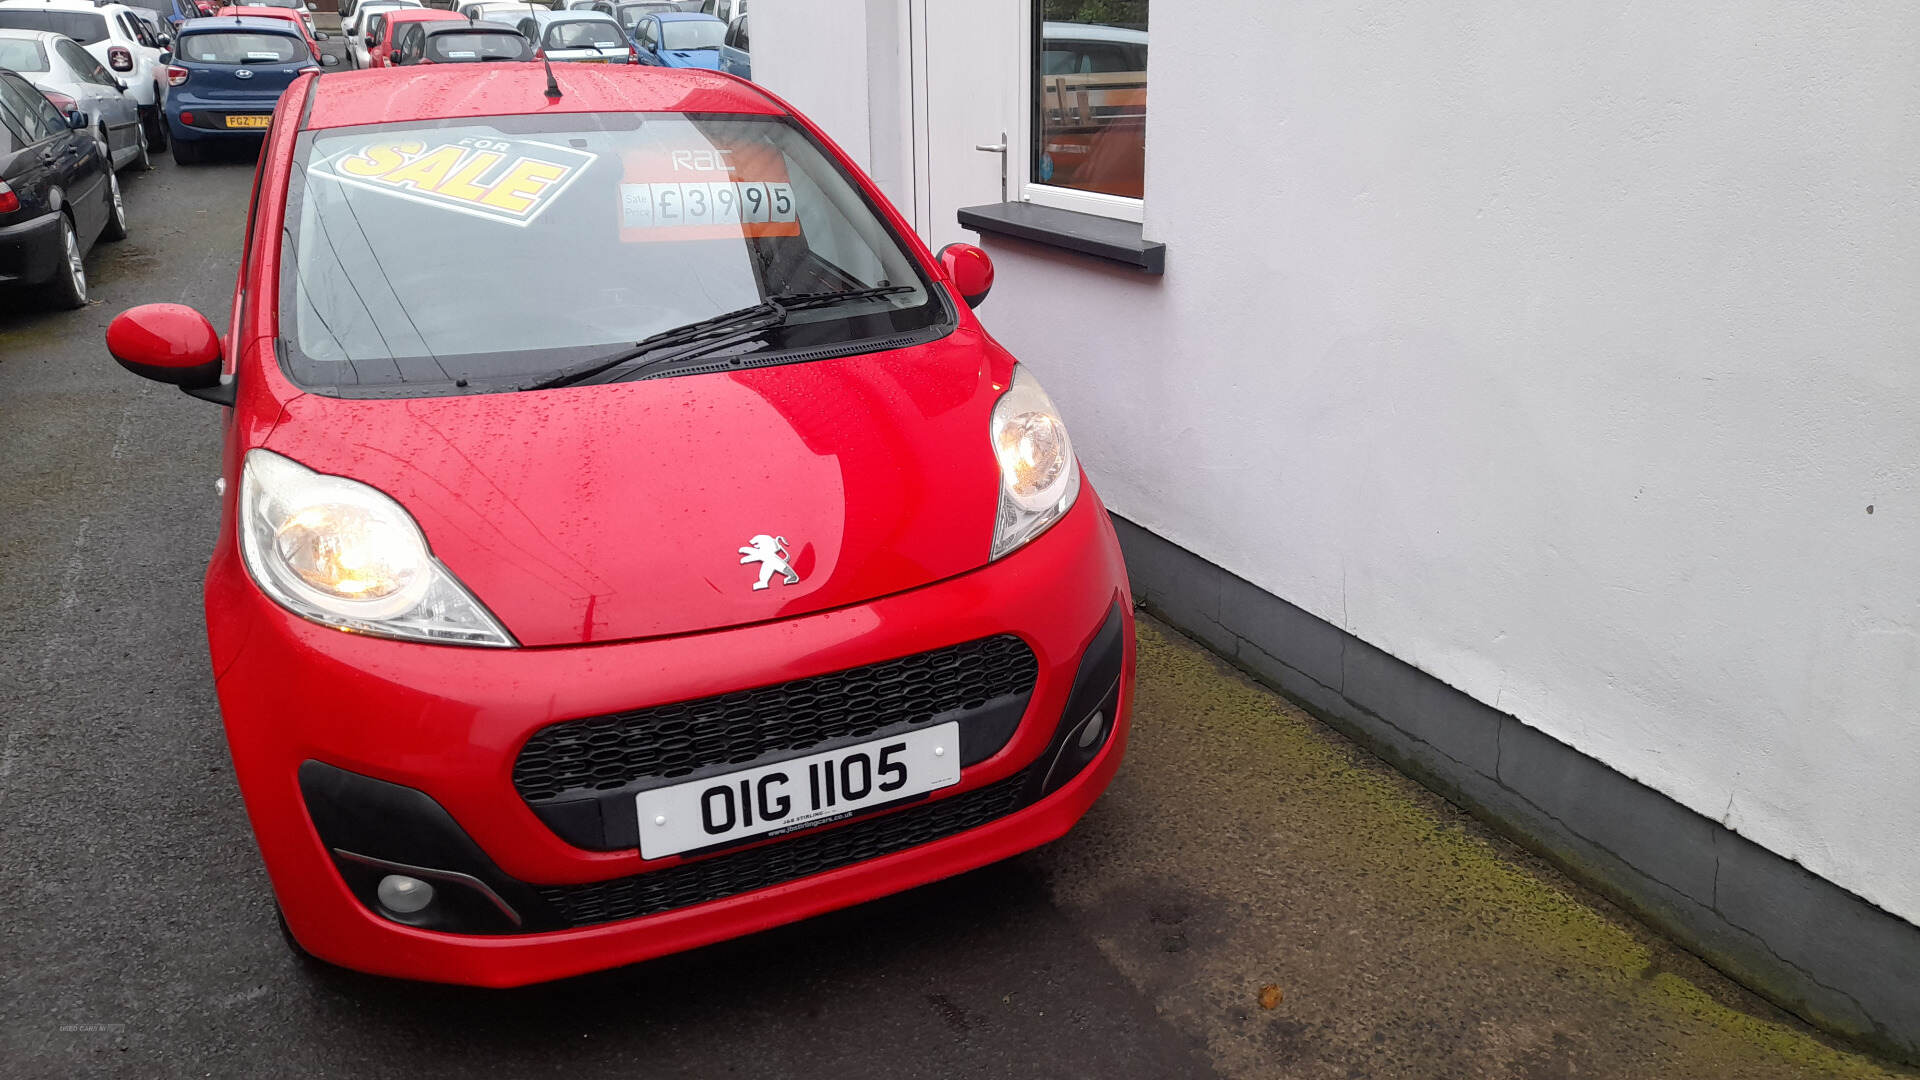 Peugeot 107 sorry now sold in Antrim